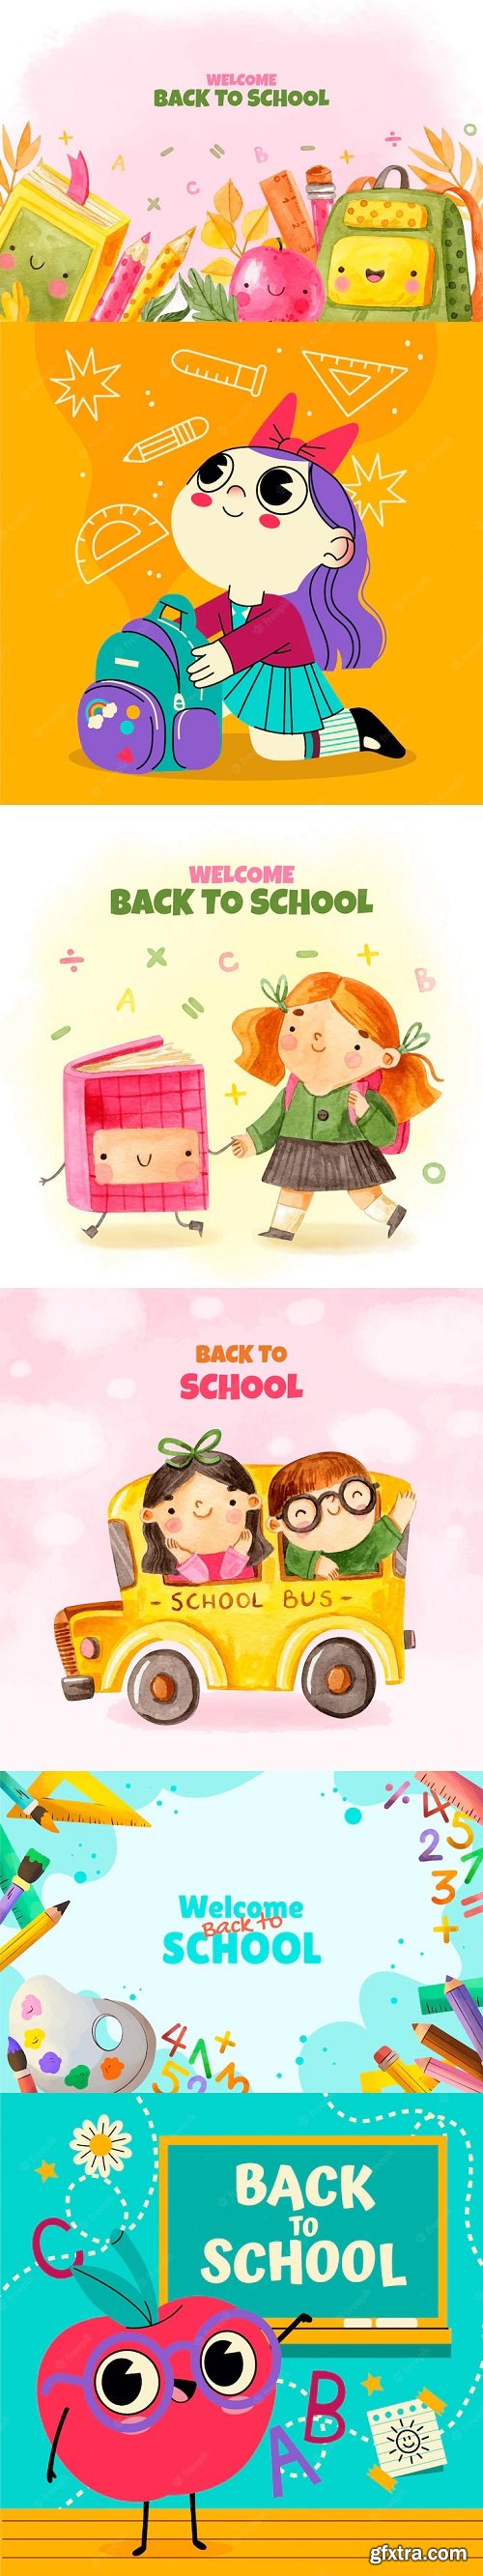 Watercolor hand drawn back to school illustration